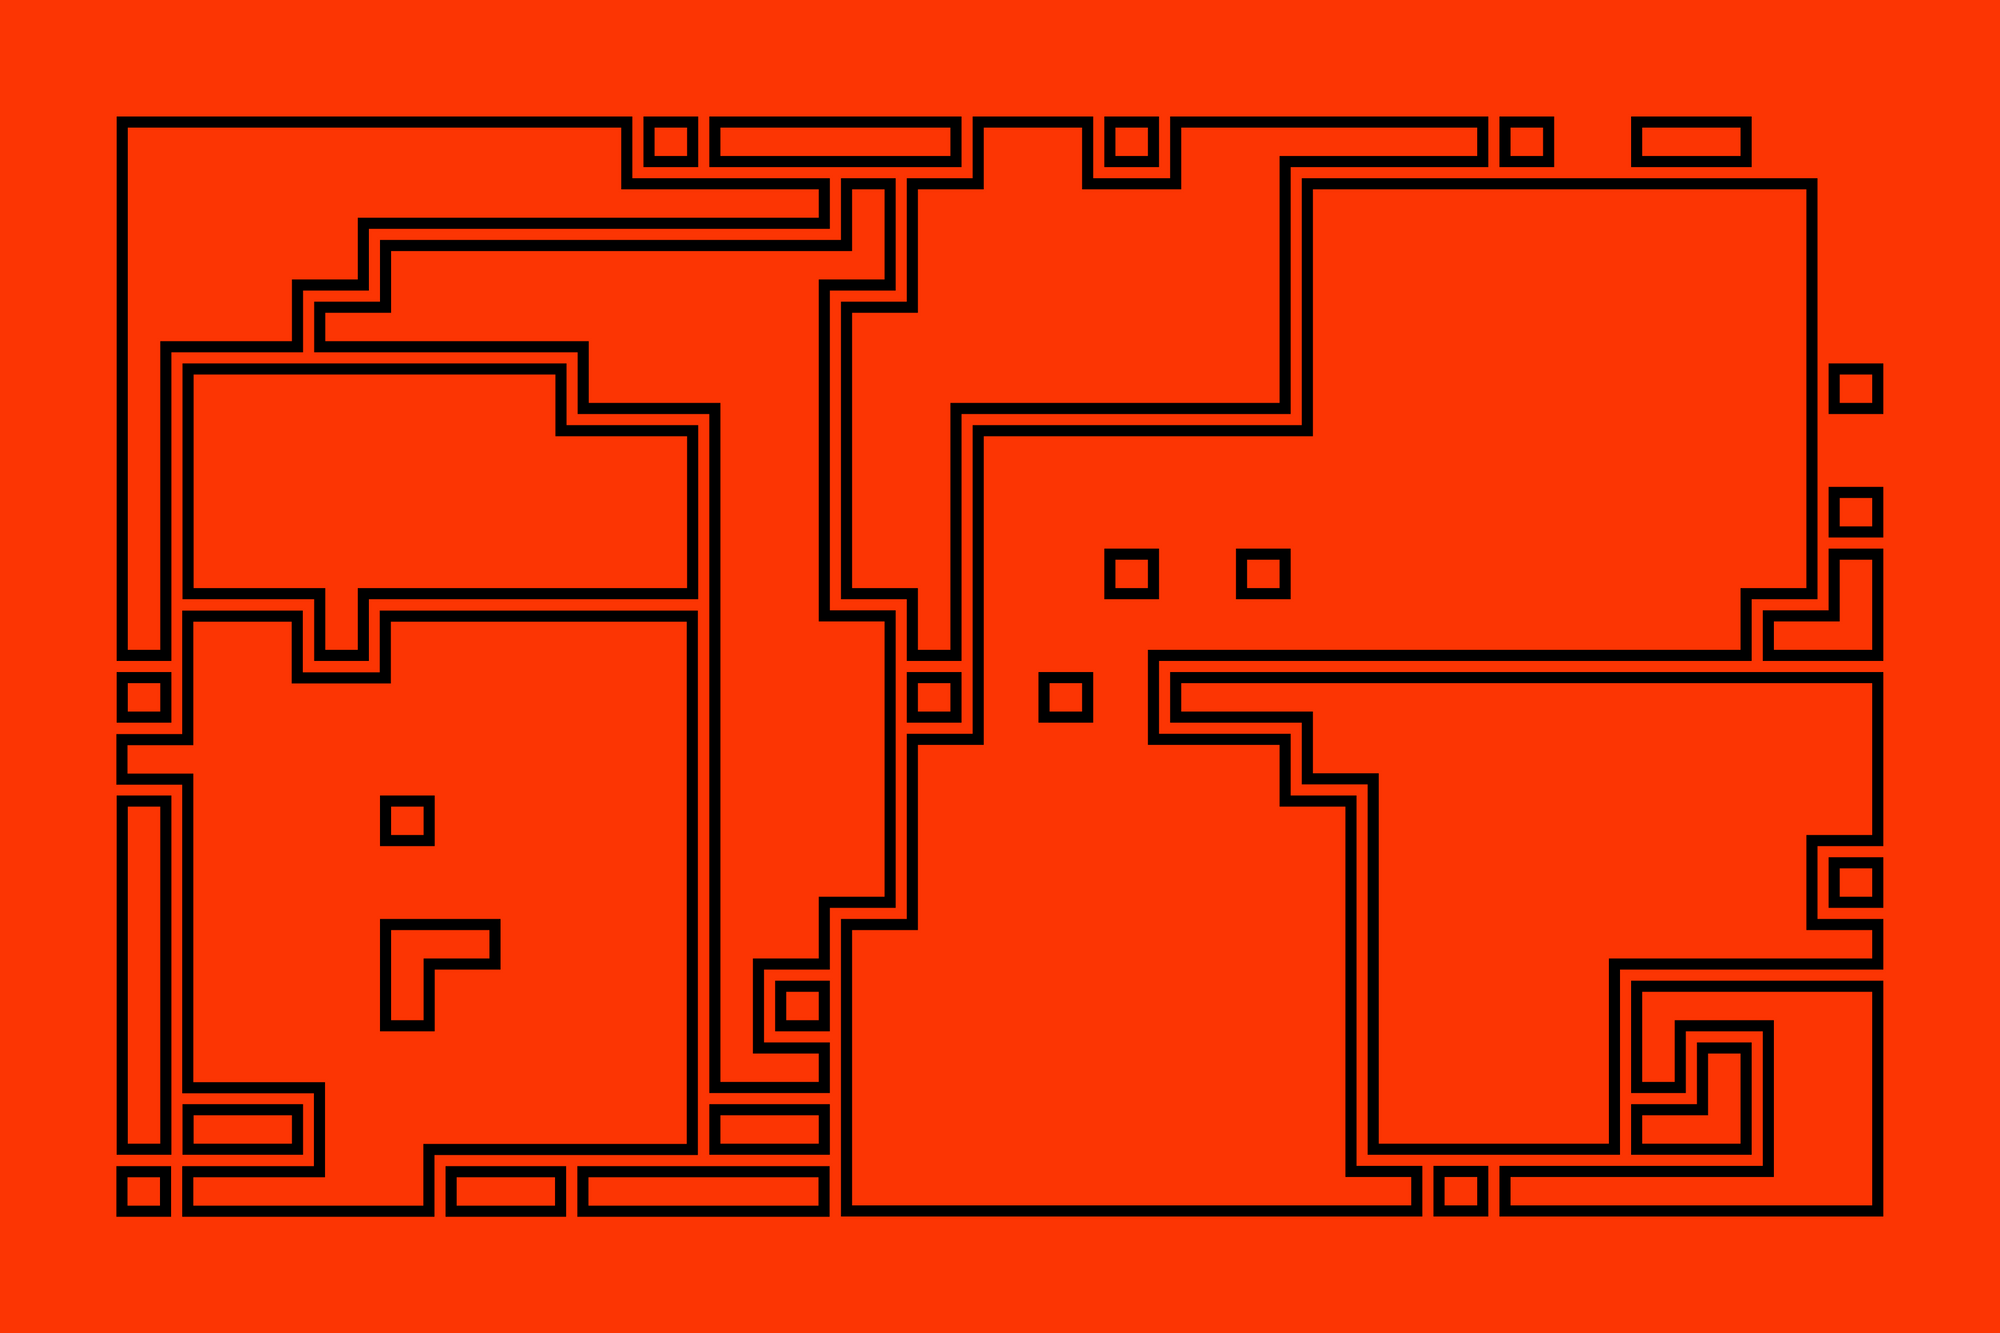 A maze like/dungeon like 2D structure. Digital art, computer generated.